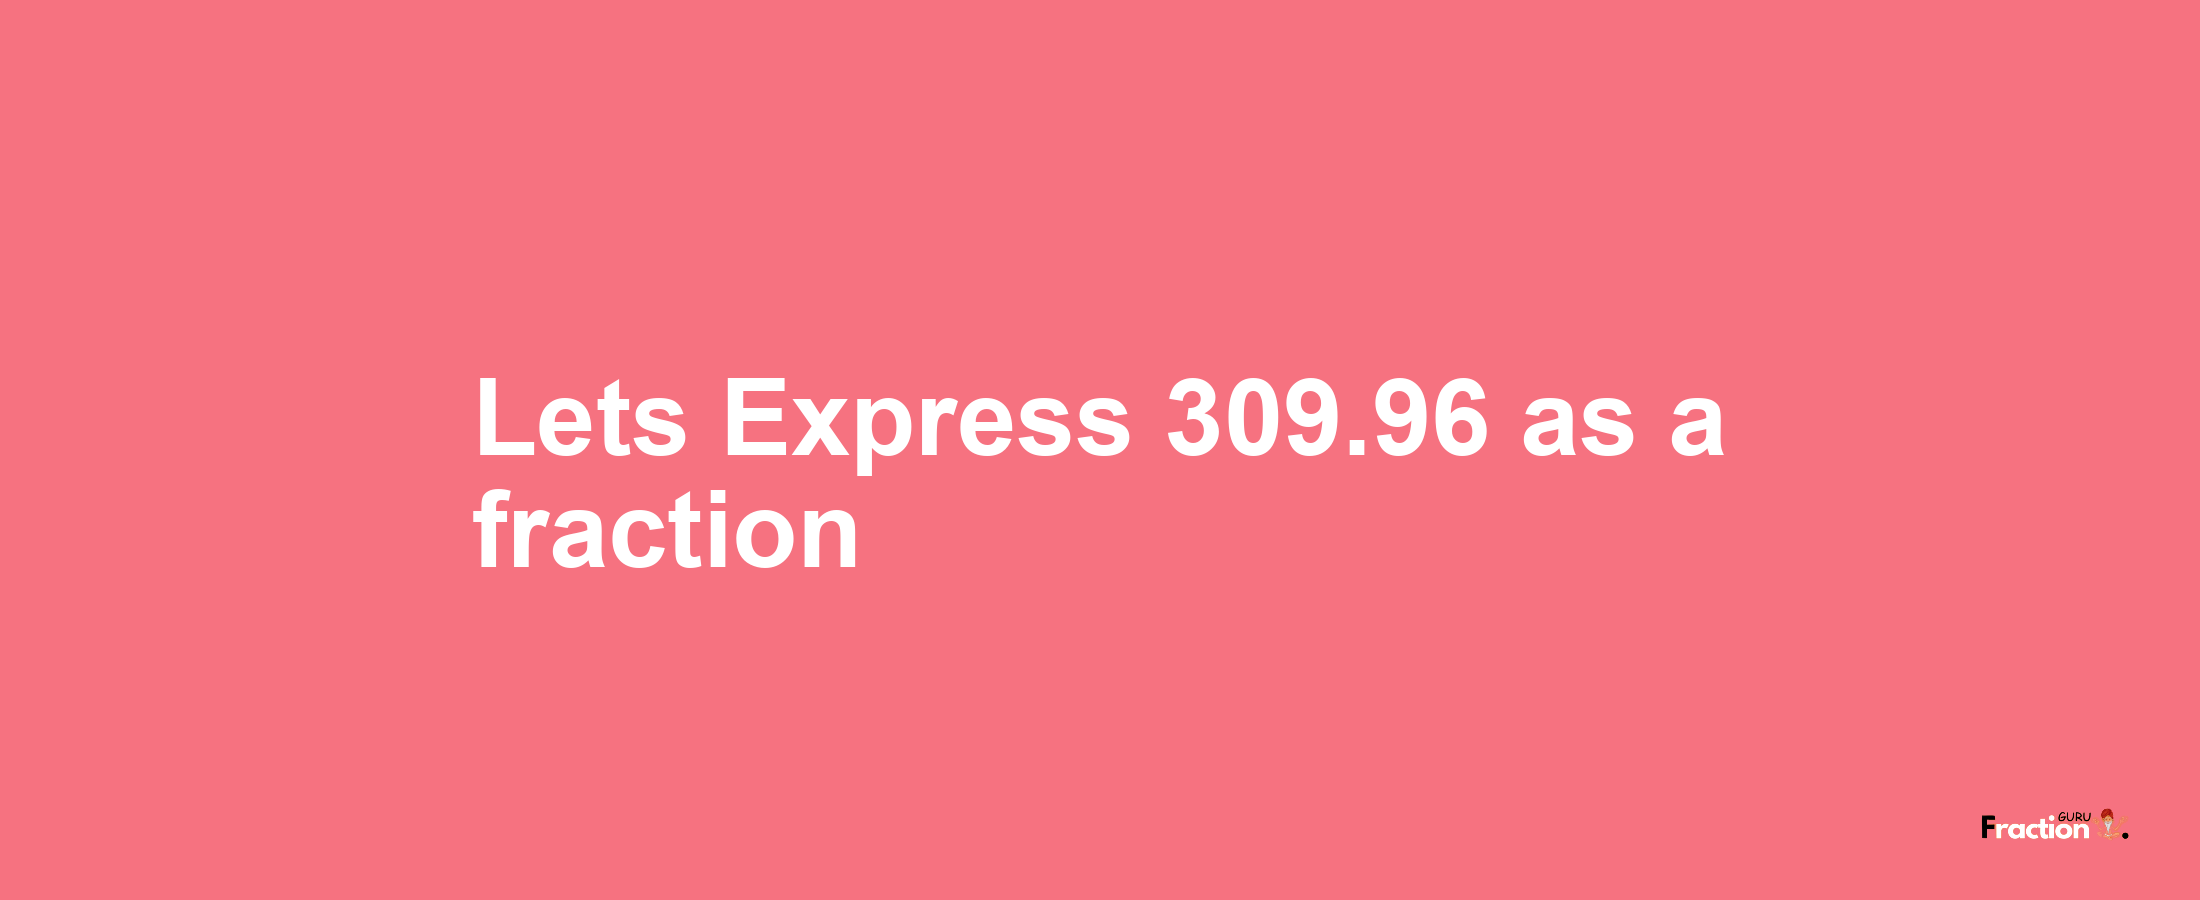 Lets Express 309.96 as afraction